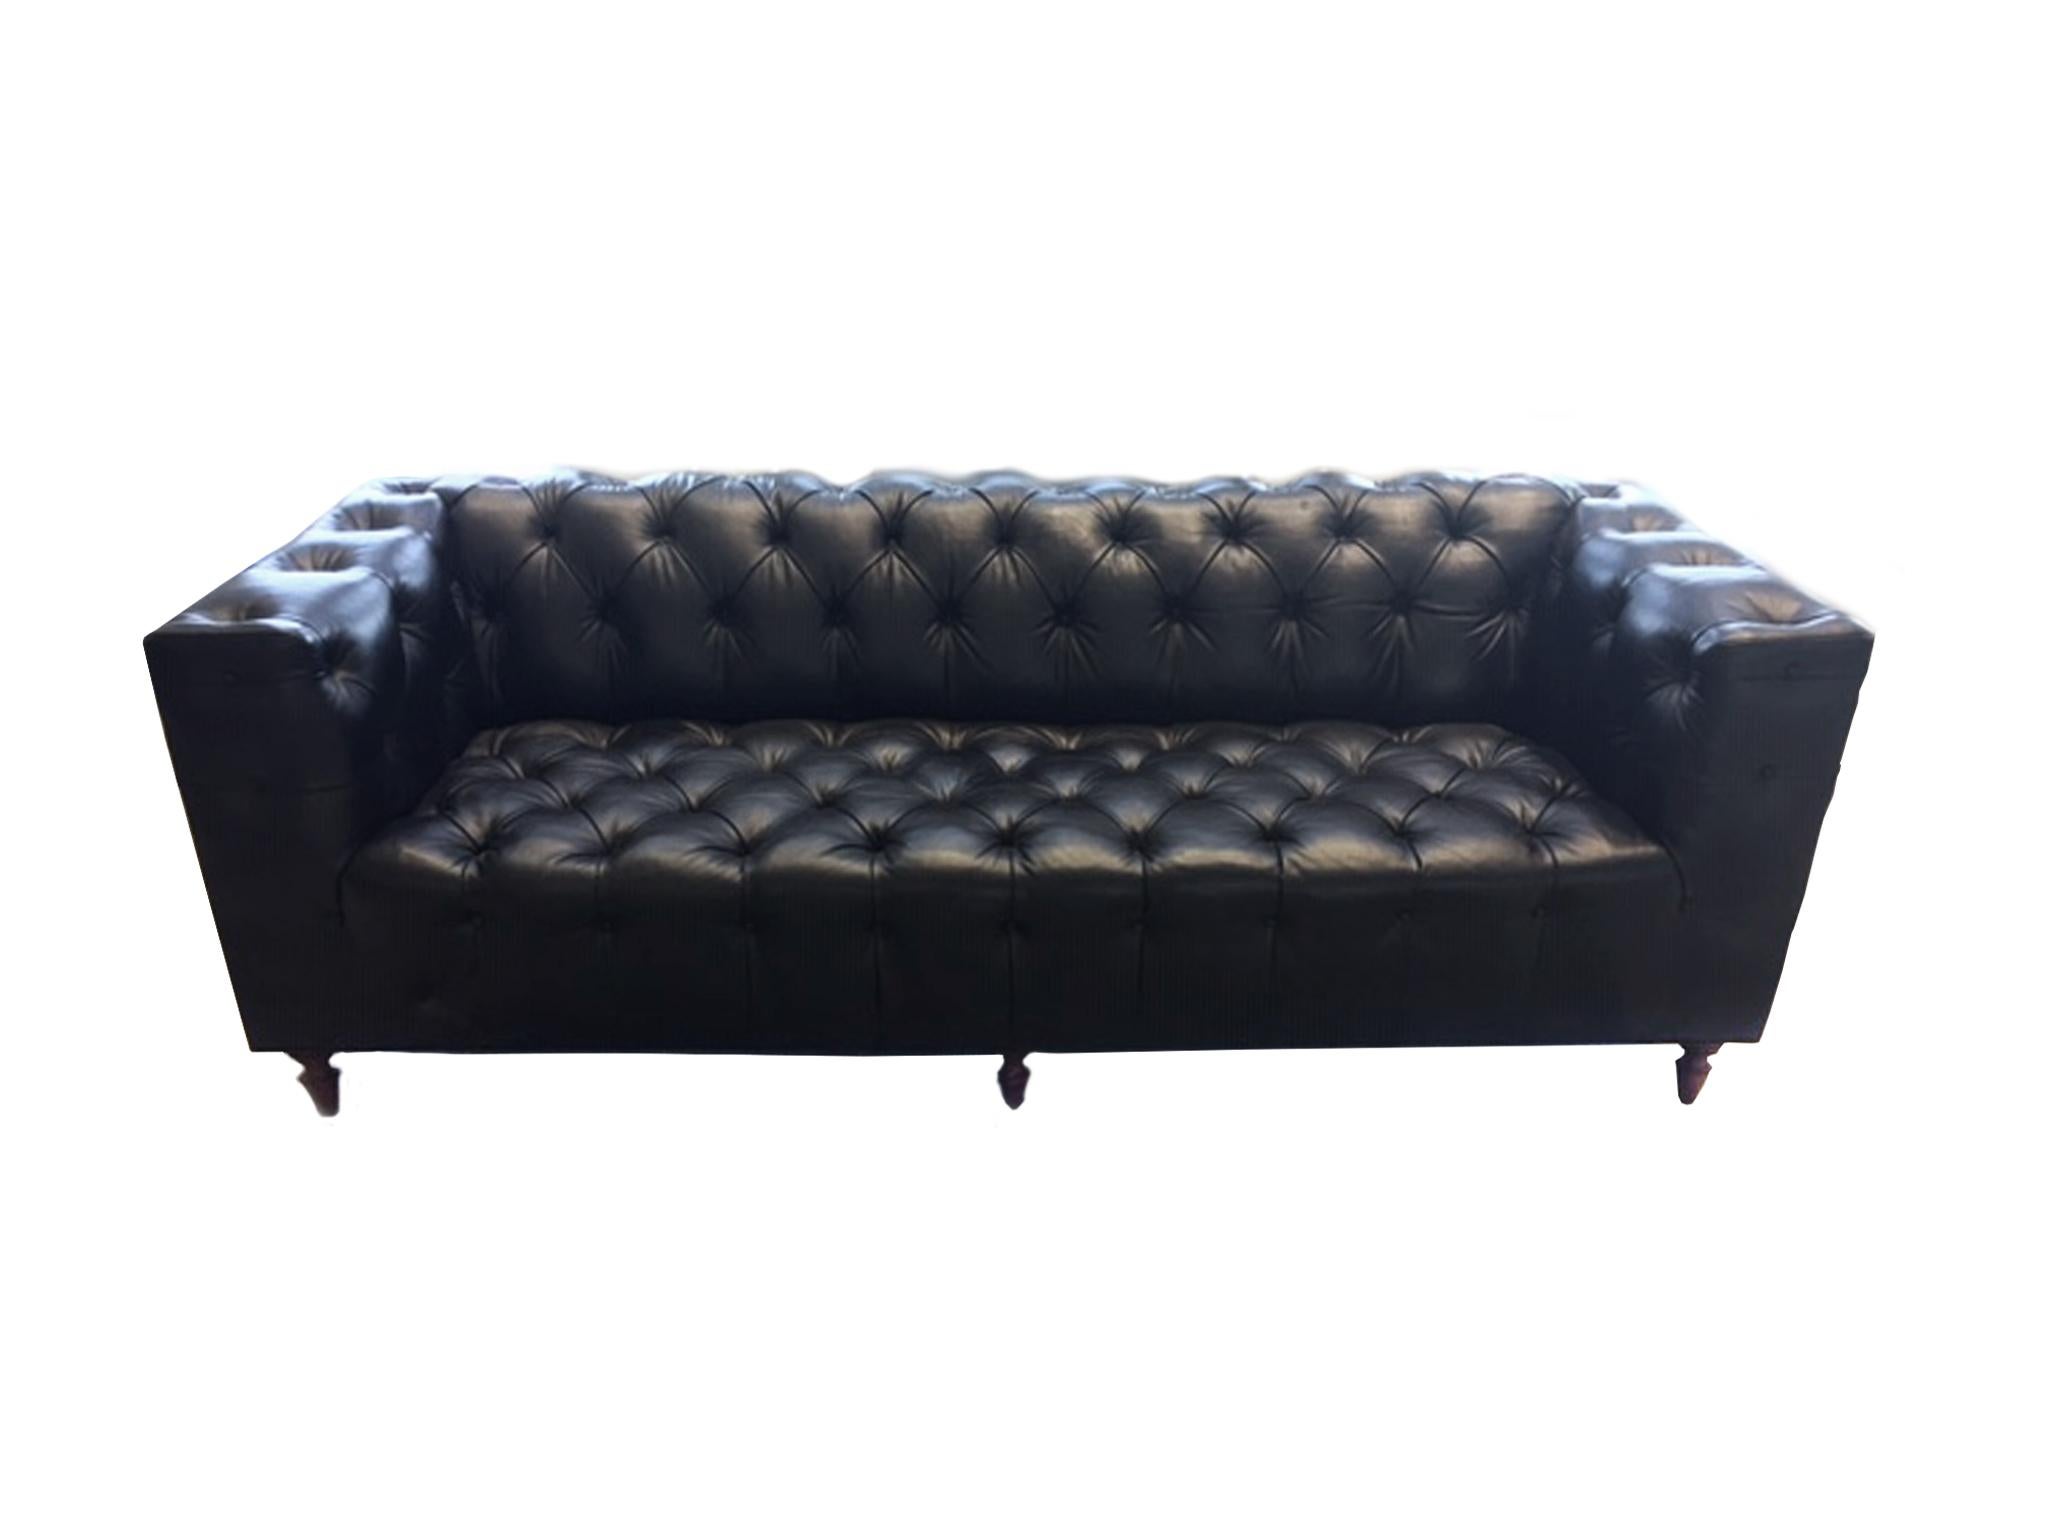 This black leather sofa was made in the 1960s, in the manner of Edward Wormley. It is a modern take on a classic: sleek, sharp lines are combined with the rounded forms of a traditional Chesterfield. The low back is constructed evenly with the arms.